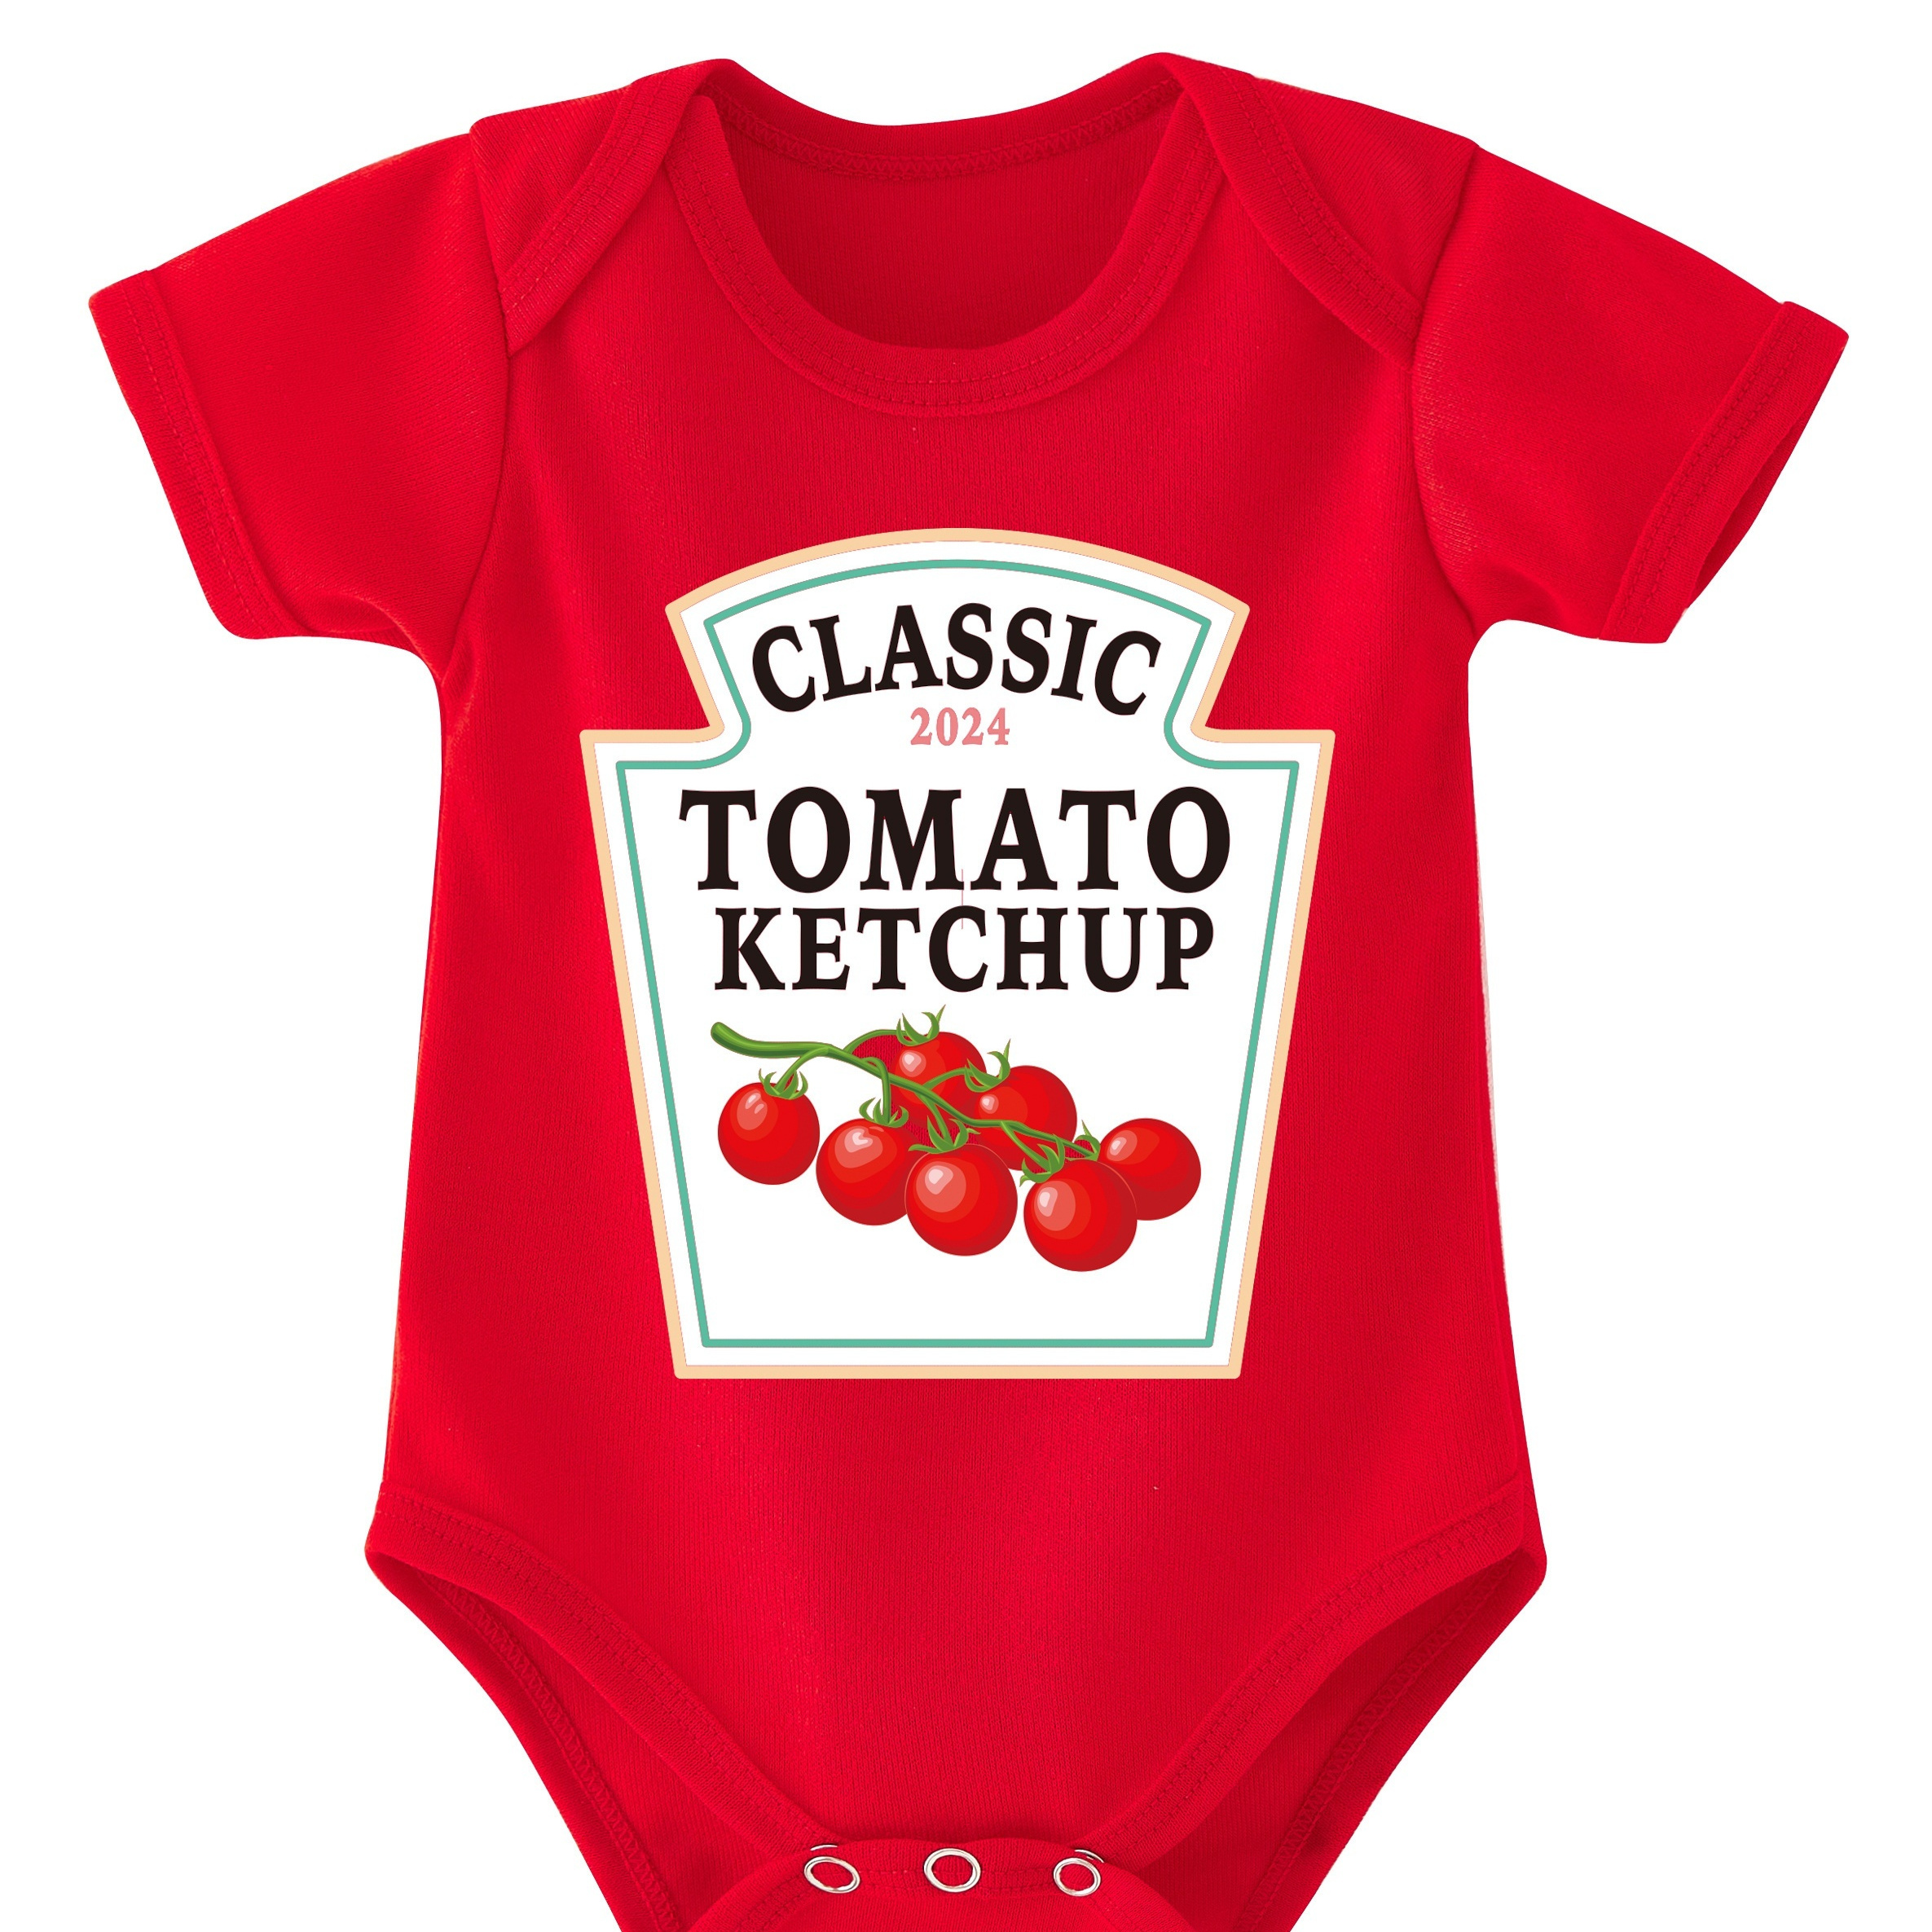 

" Classic Tomato Ketchup " Stylish Letter Print Newborn Onesie, Summer Short Sleeve Baby Triangle Romper, Cartoon Tomato Sauce Pattern Infant Triangle Puffer Coat, Pregnancy Gift